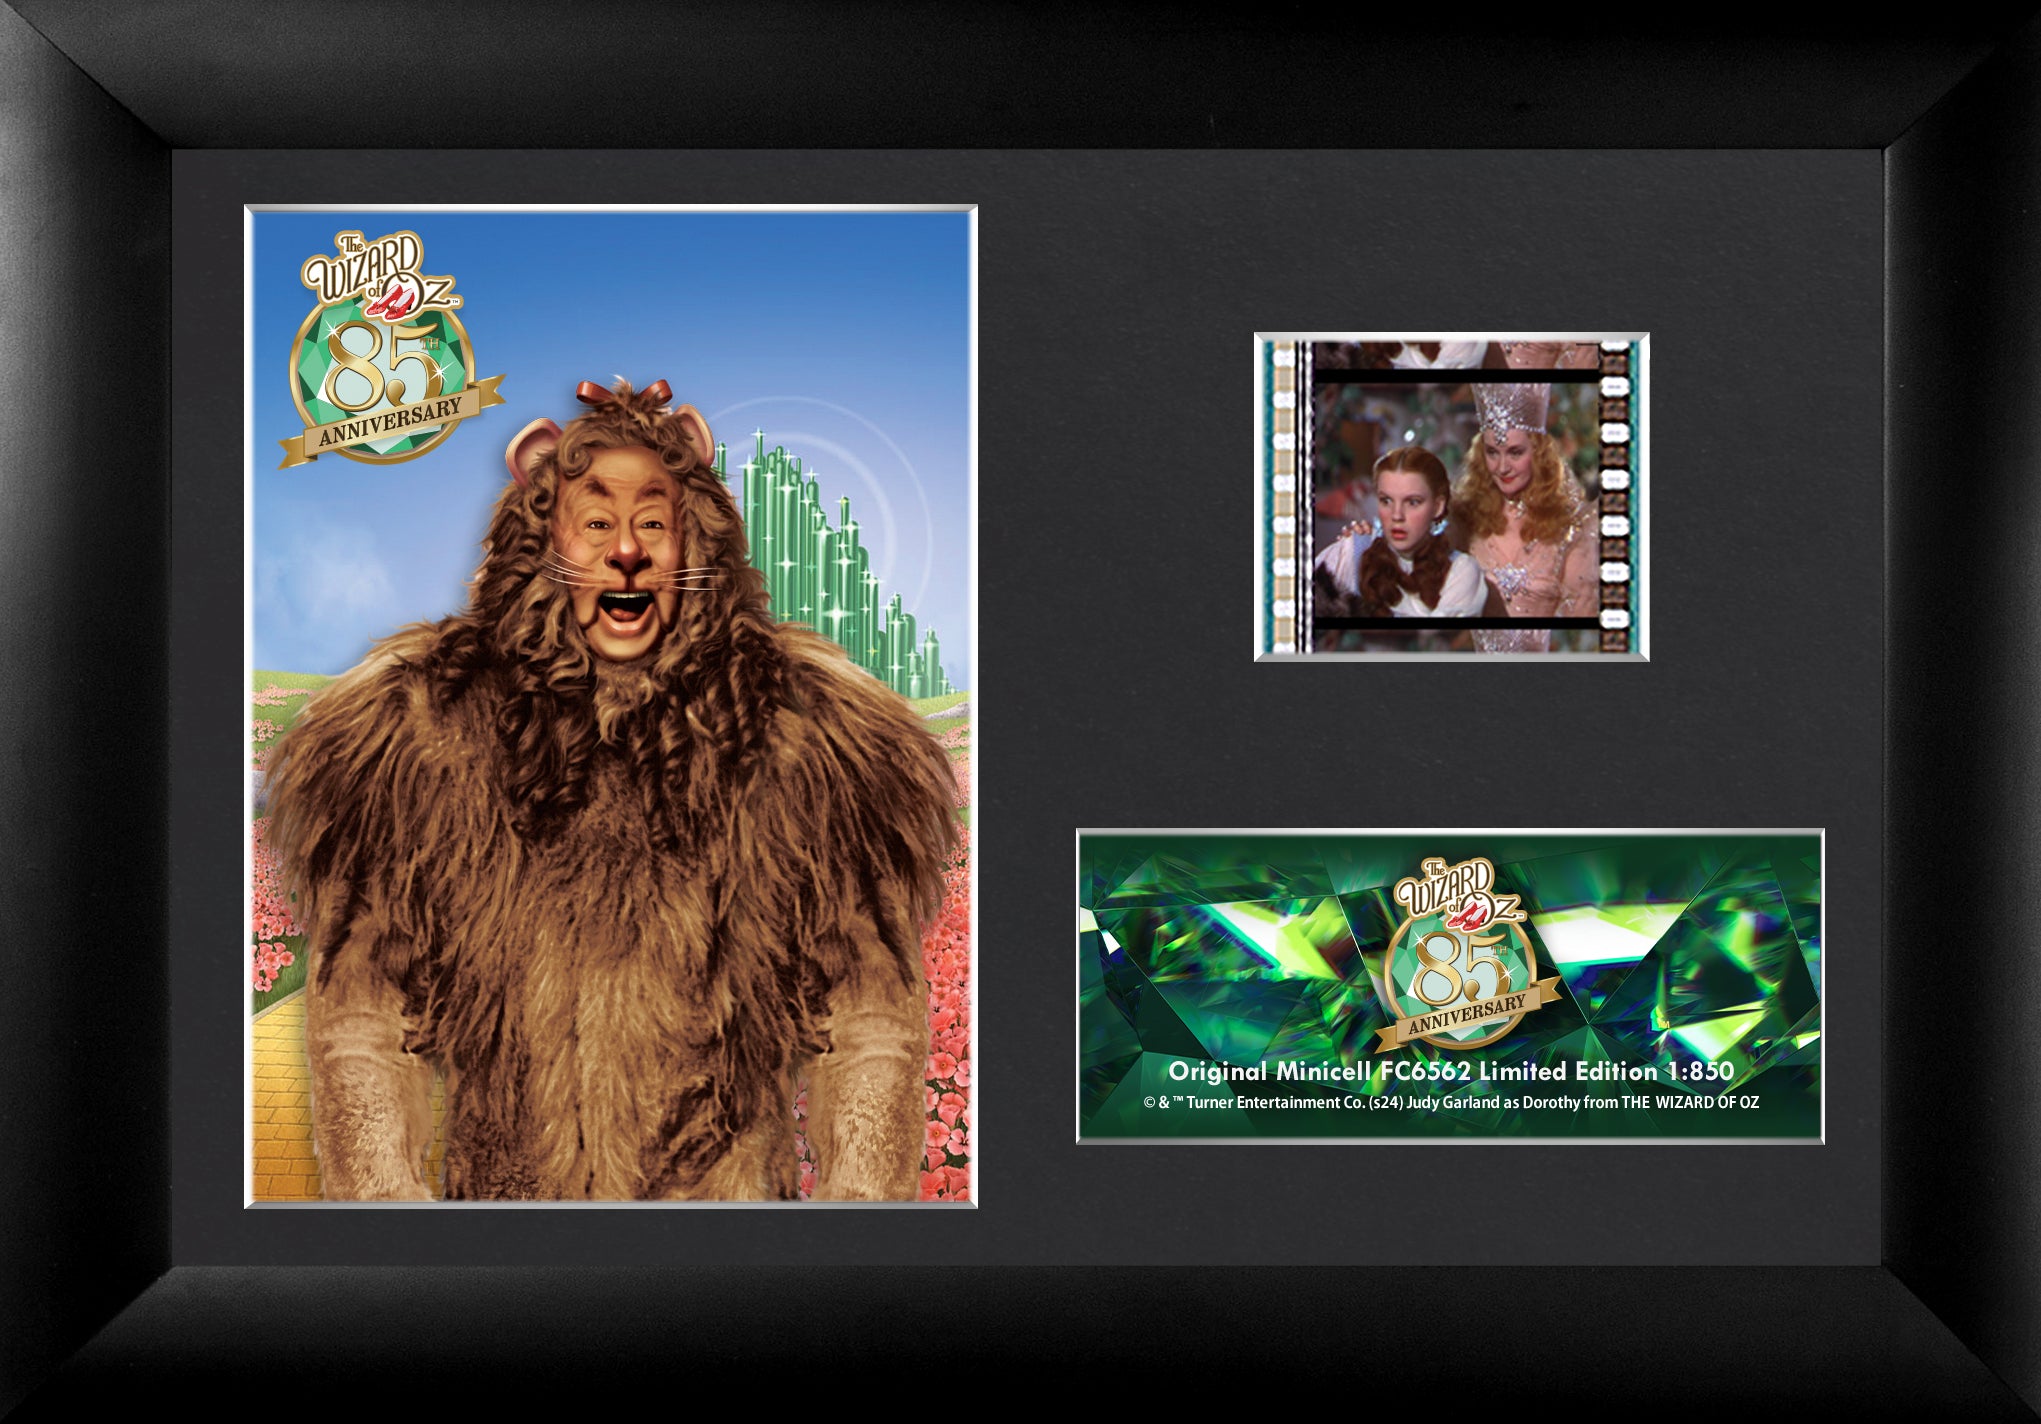 The Wizard of Oz (85th Anniversary – Cowardly Lion) Minicell FilmCells Framed Desktop Presentation USFC6562